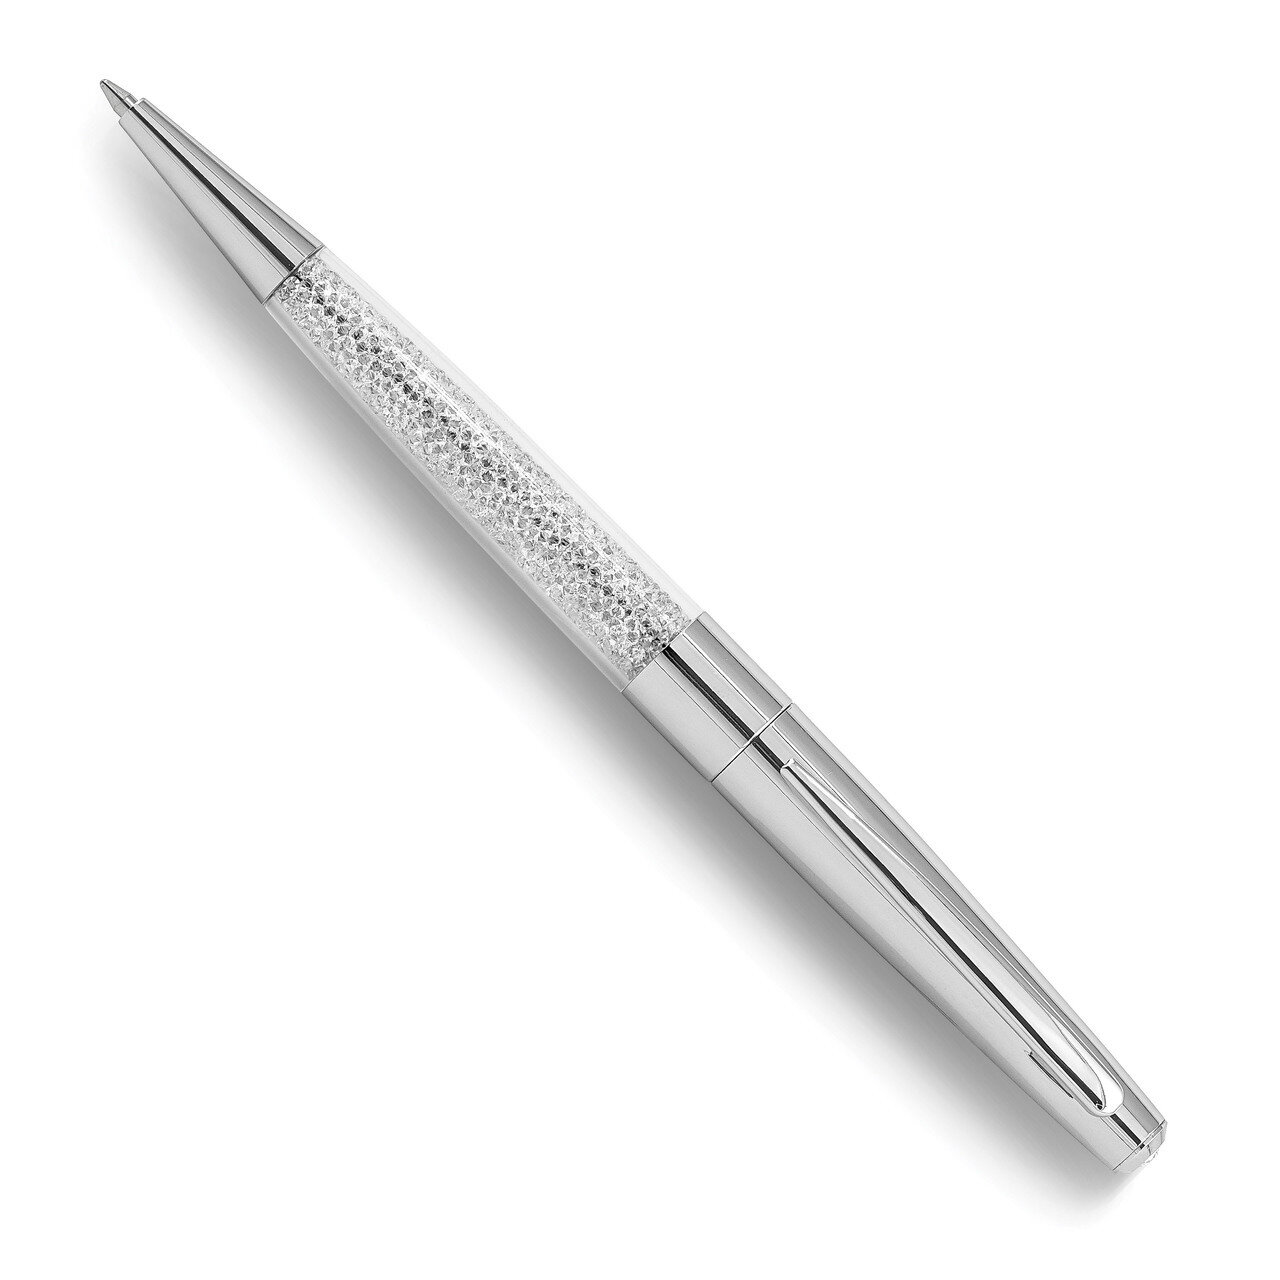 Silver-tone Ballpoint Pen Crystal Filled by Jere